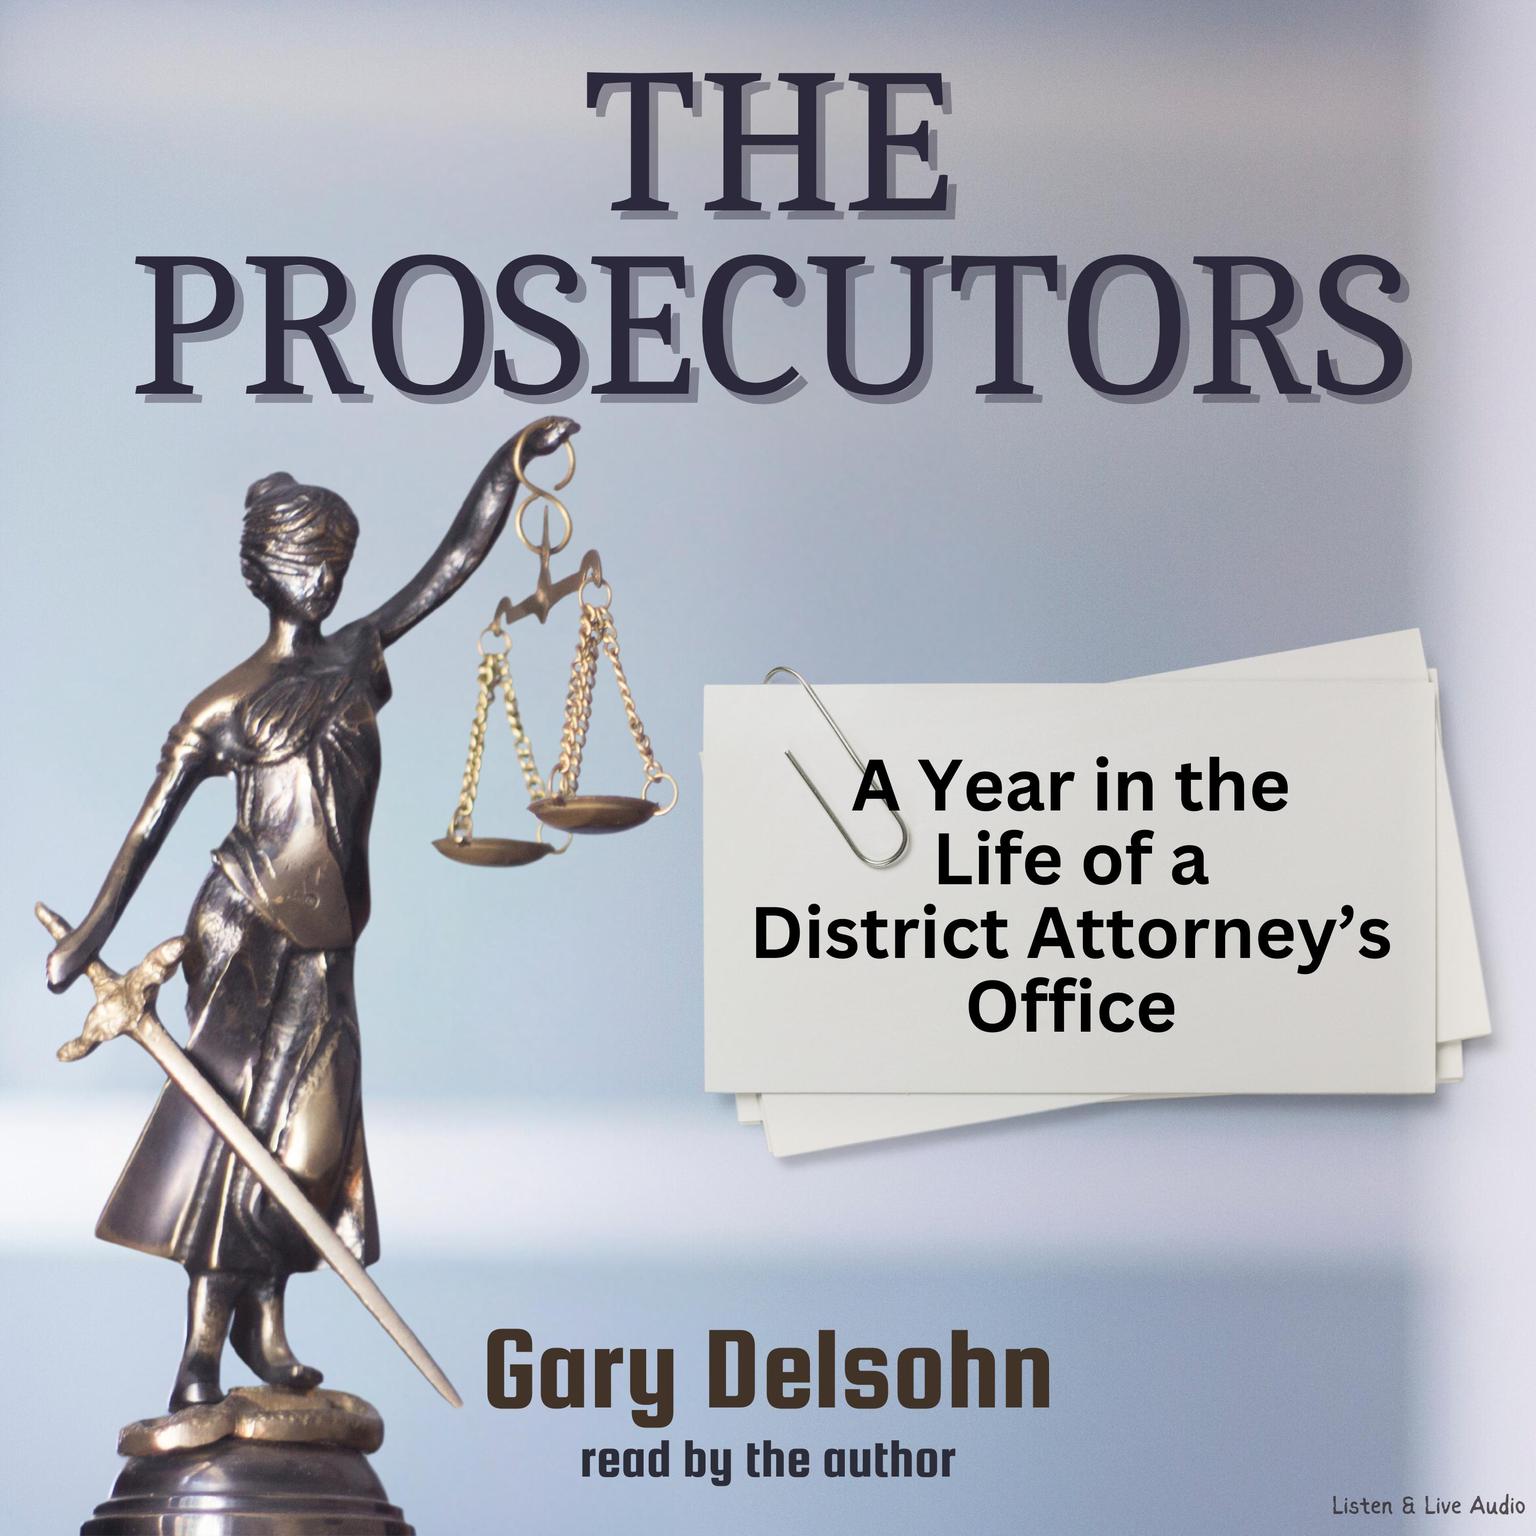 The Prosecutors (Abridged): A Year in the Life of a District Attorney’s Office Audiobook, by Gary Delsohn